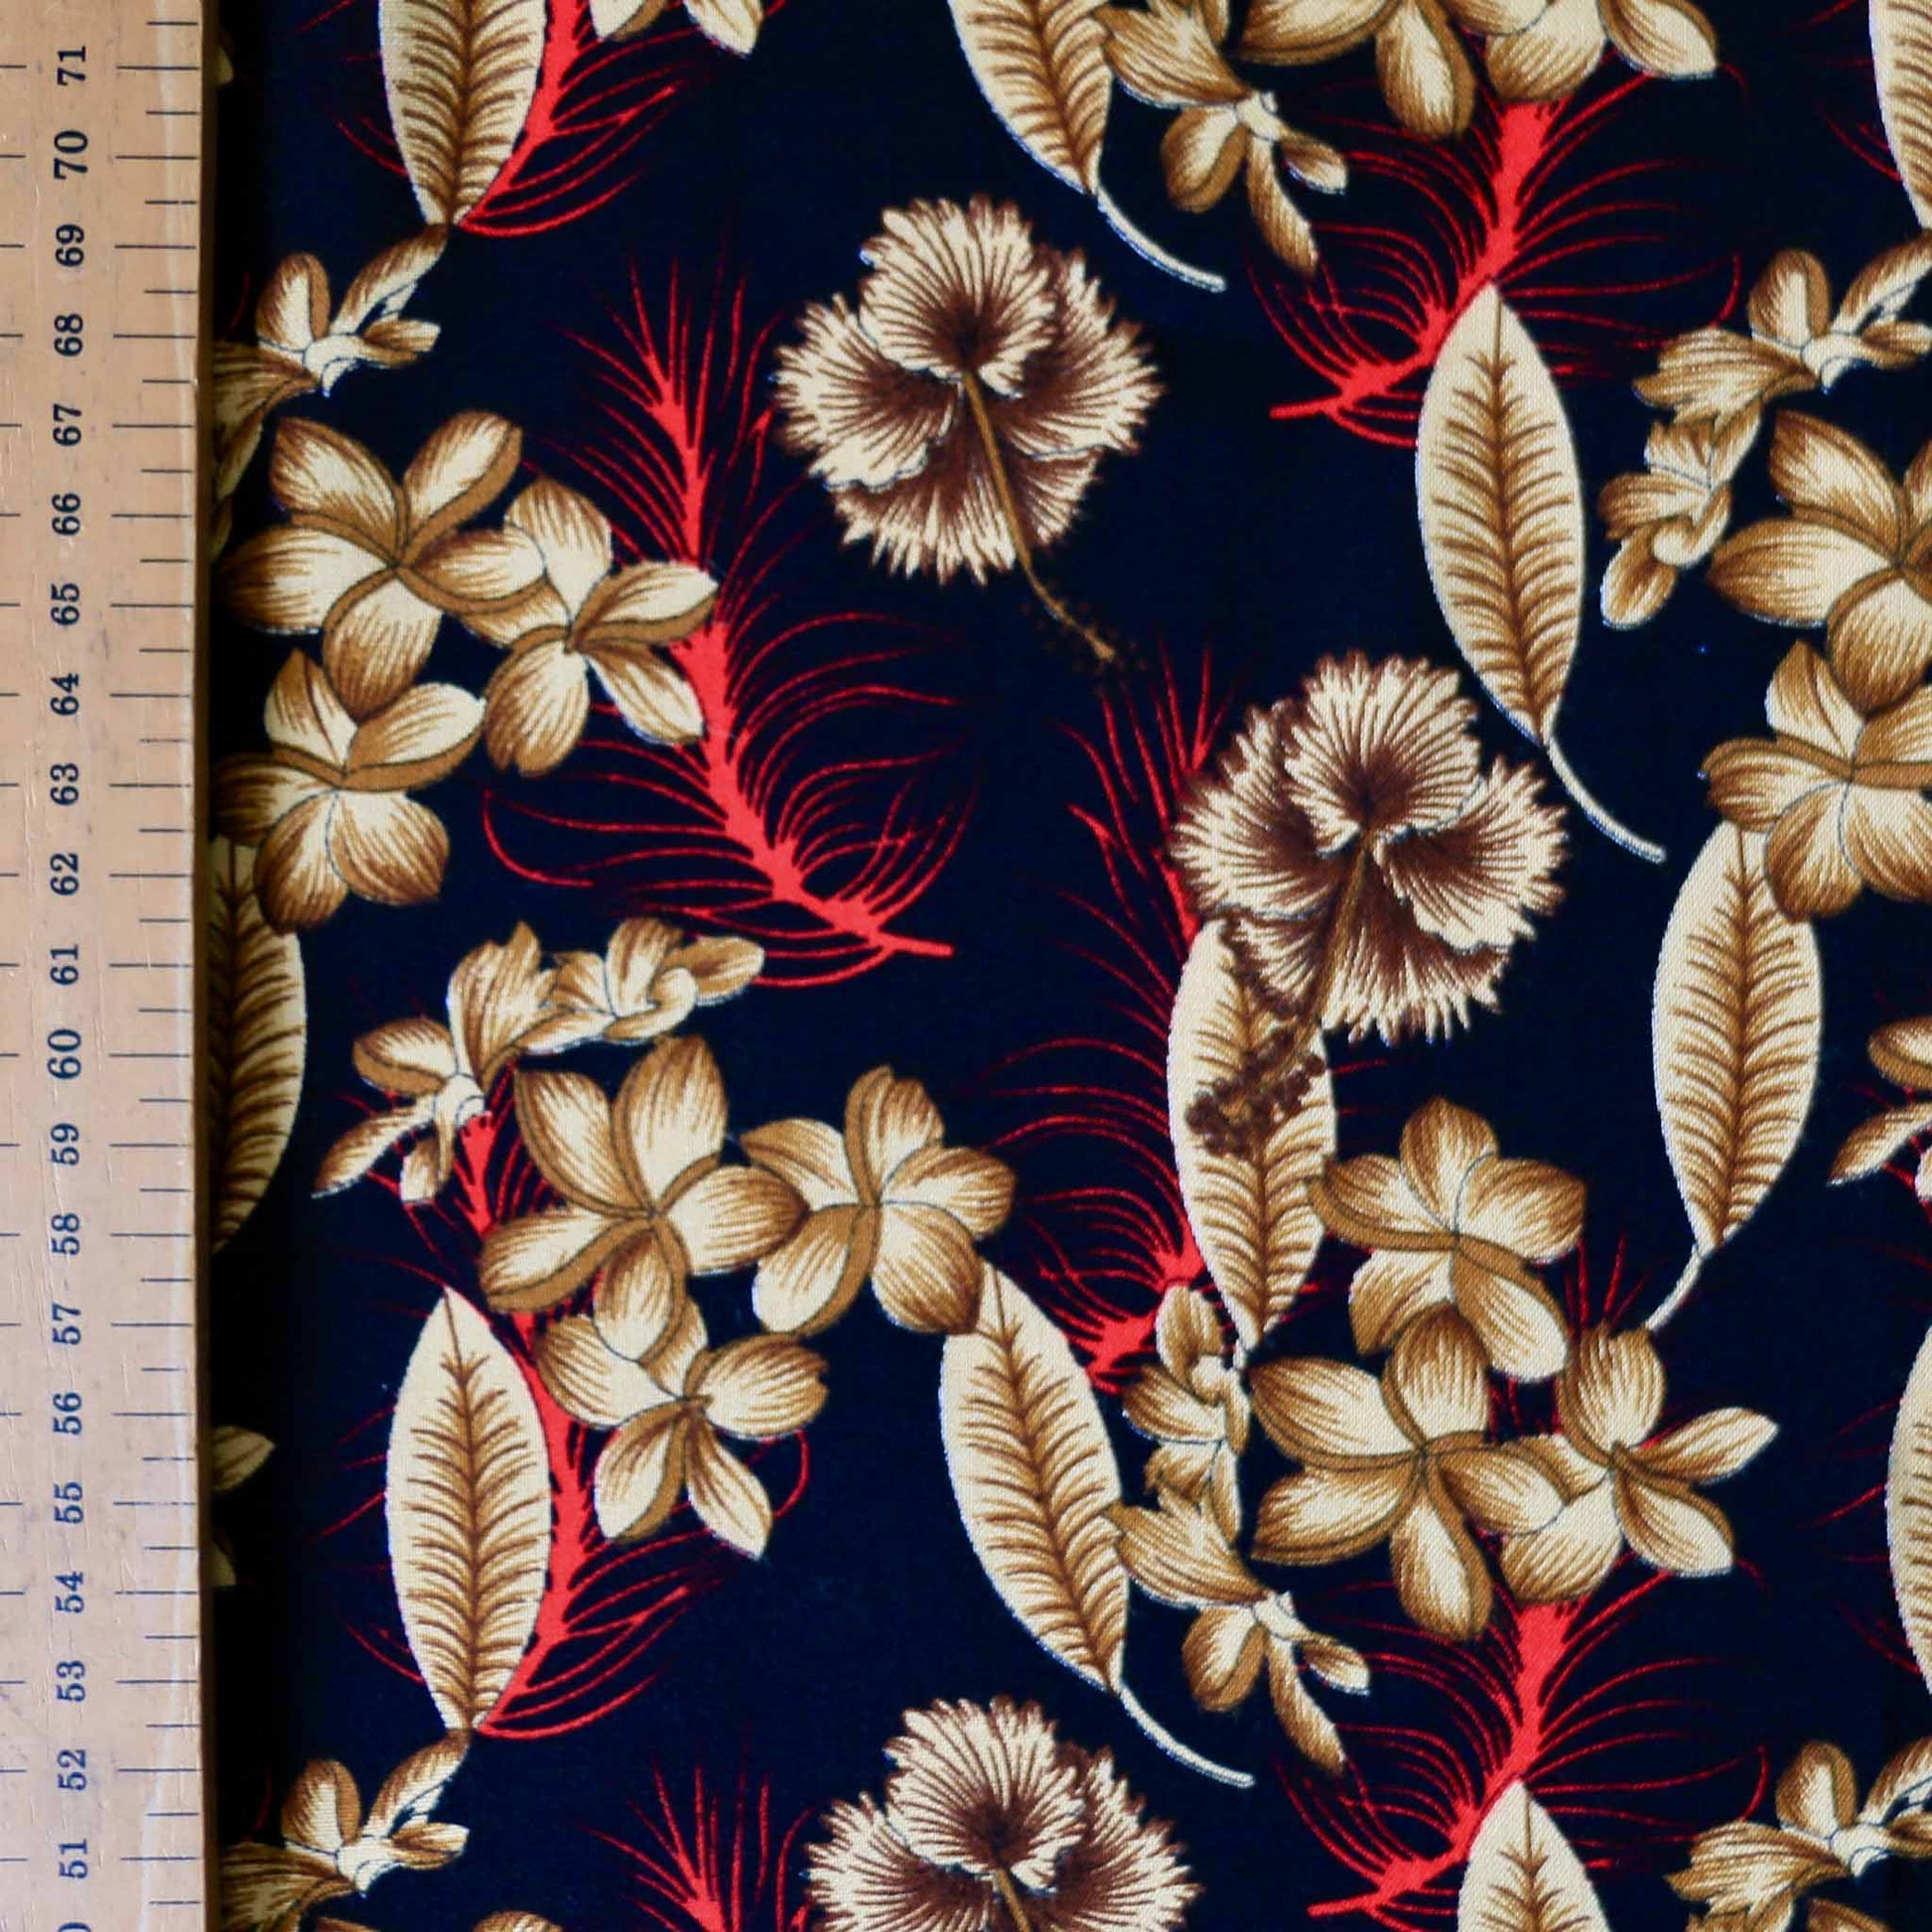 metre black viscose challis dressmaking rayon fabric with beige and red flowers printed